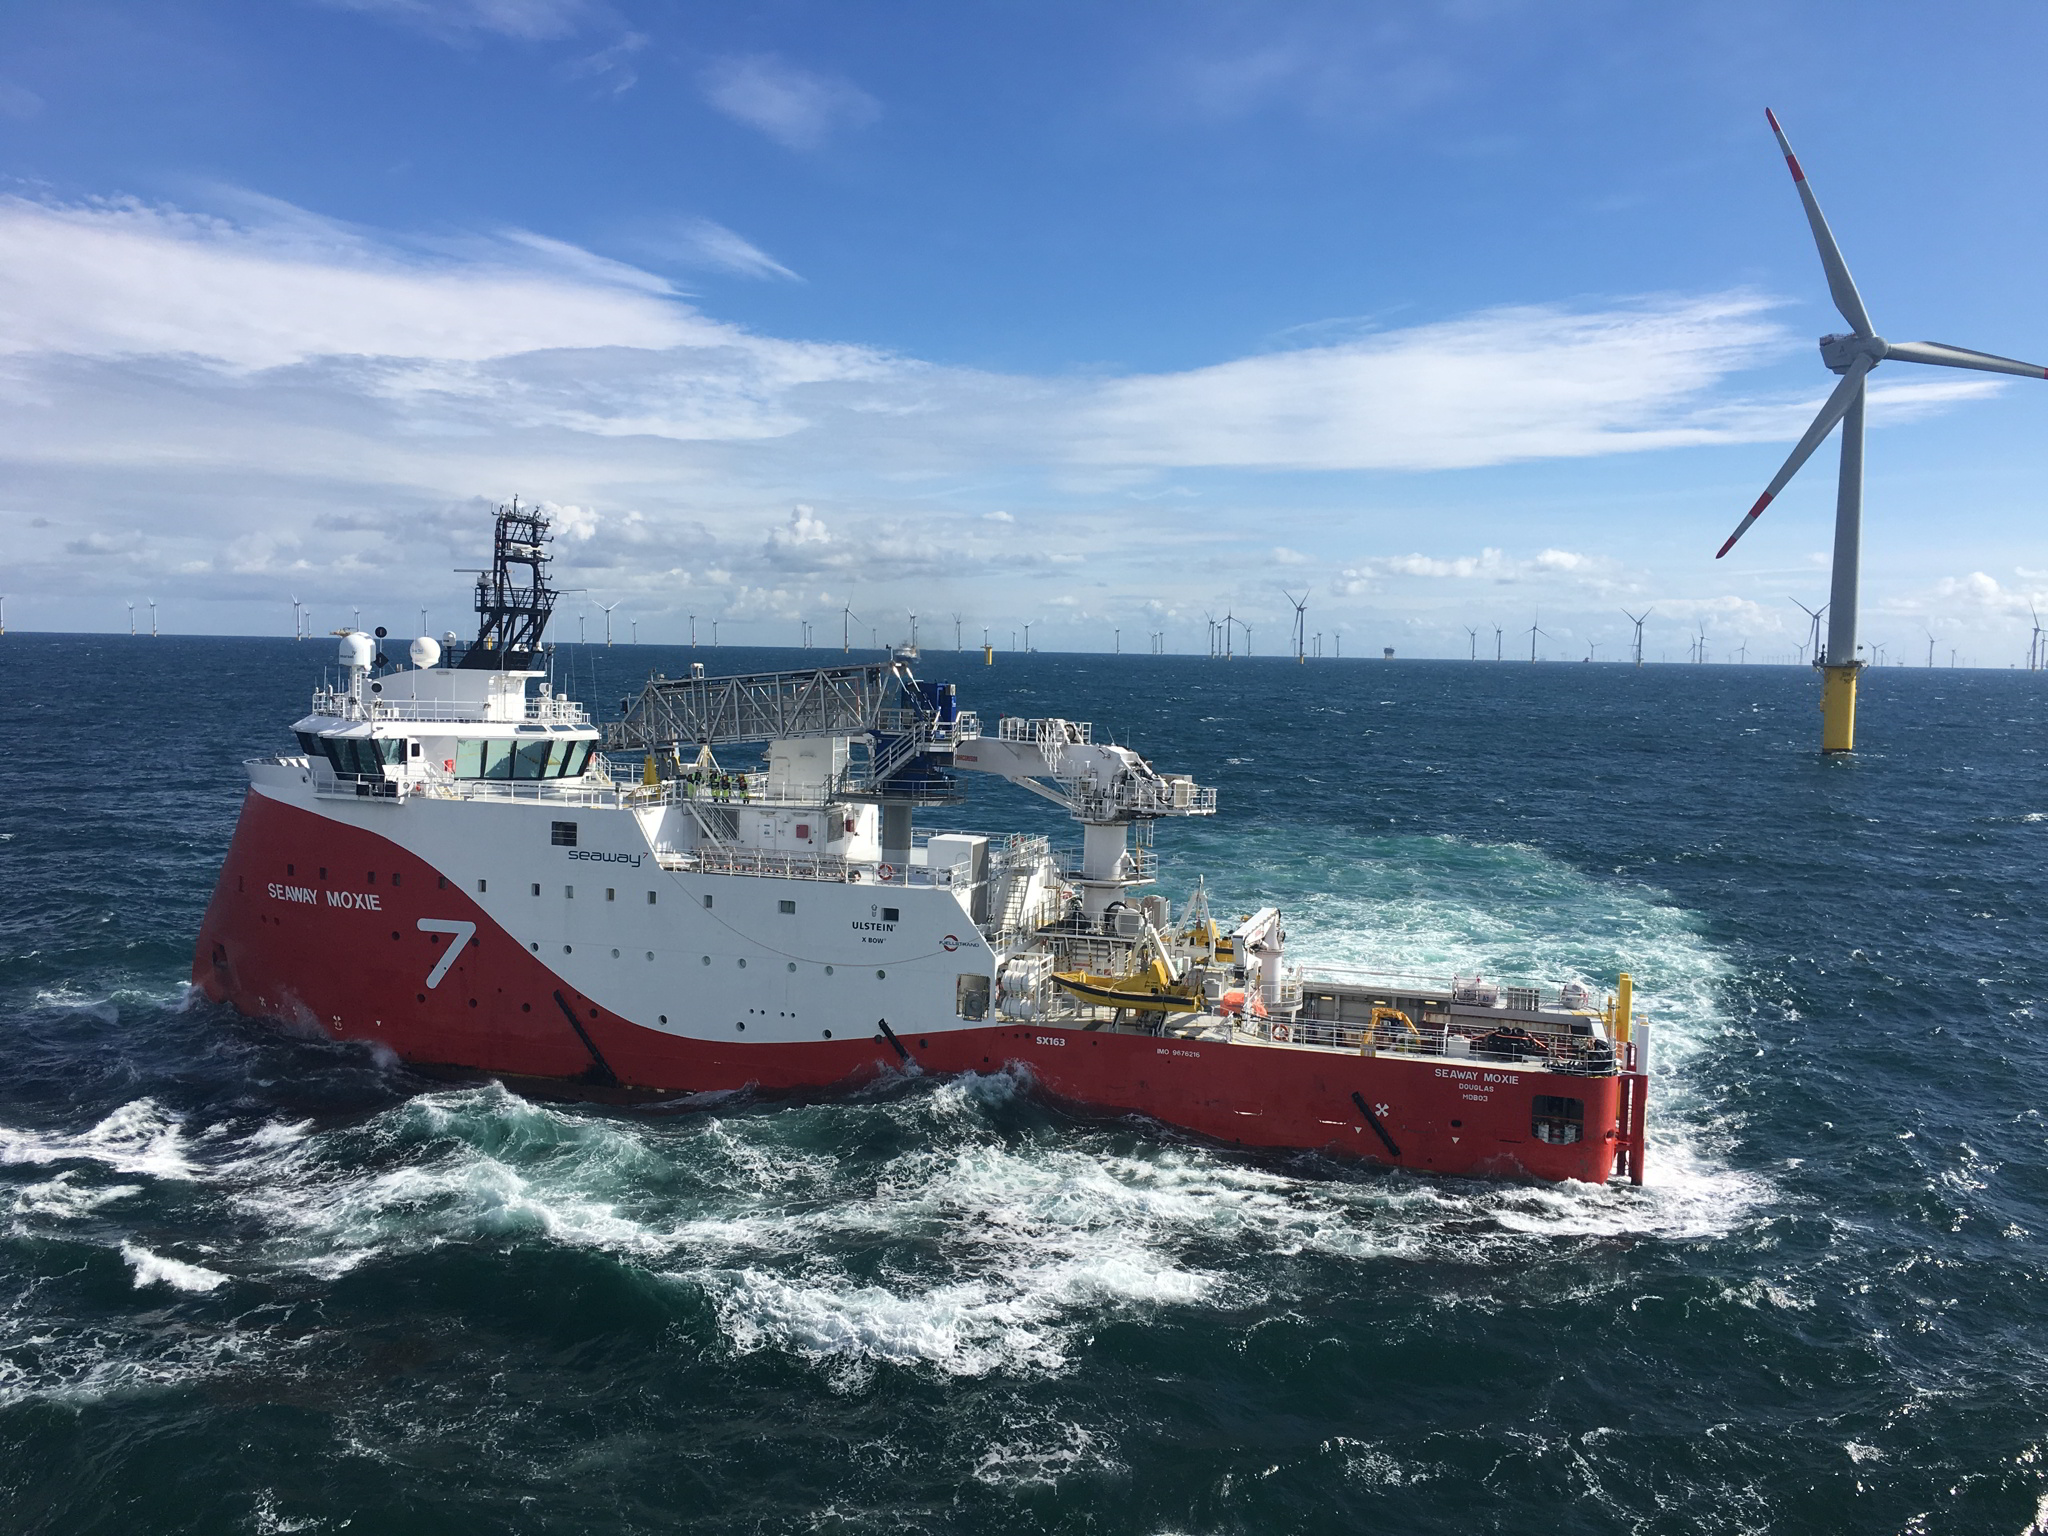 Seaway Moxie at an offshore wind farm